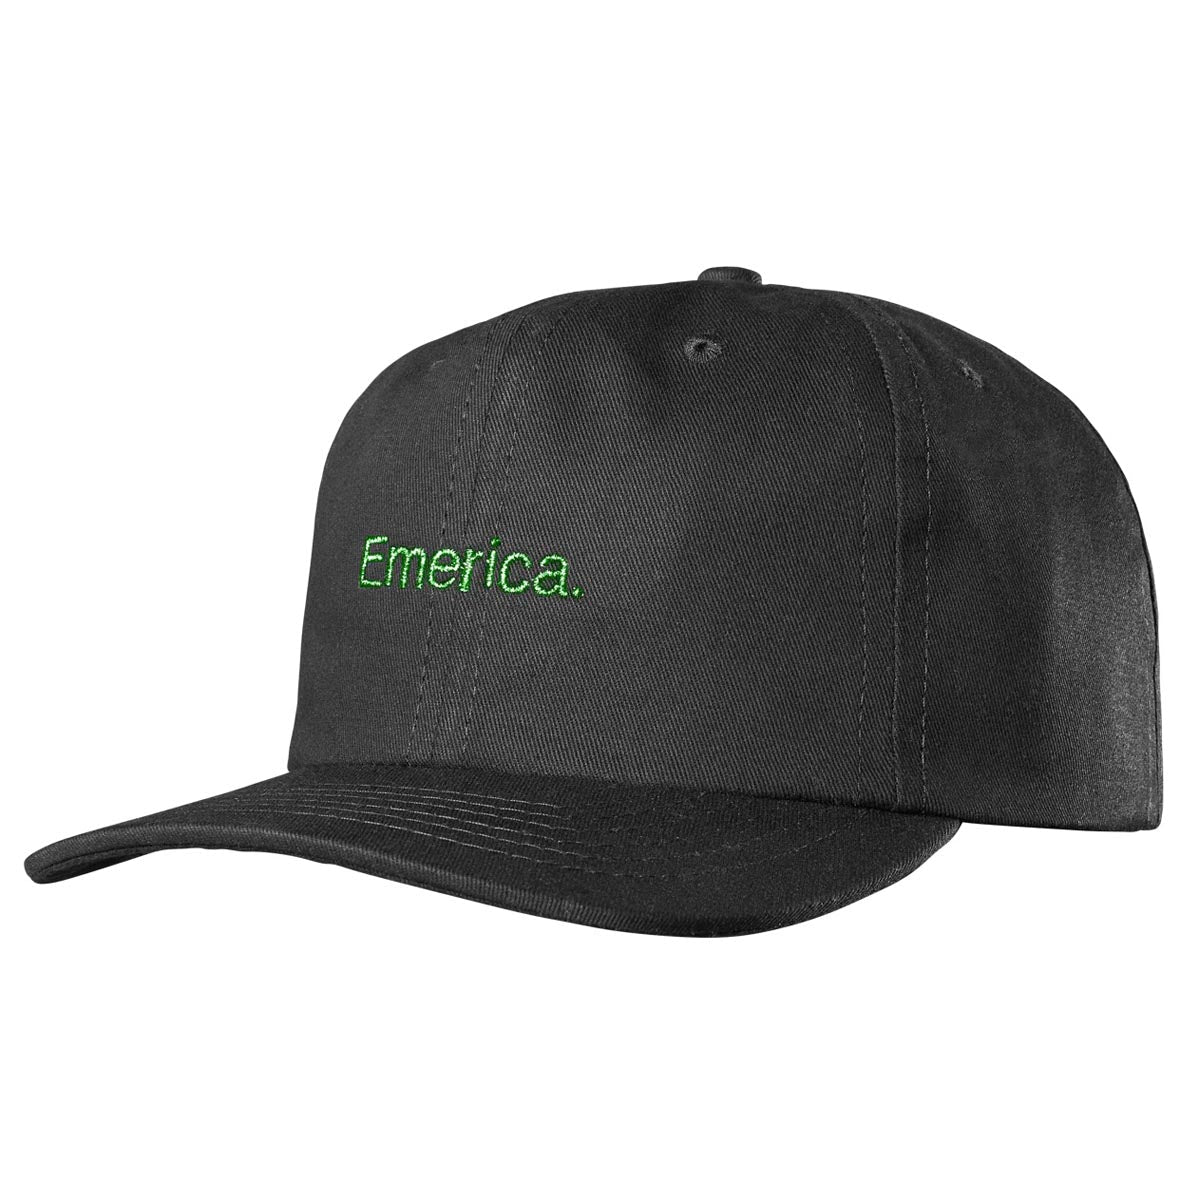 Emerica Pure Gold Dad Hat - Black/Green image 1